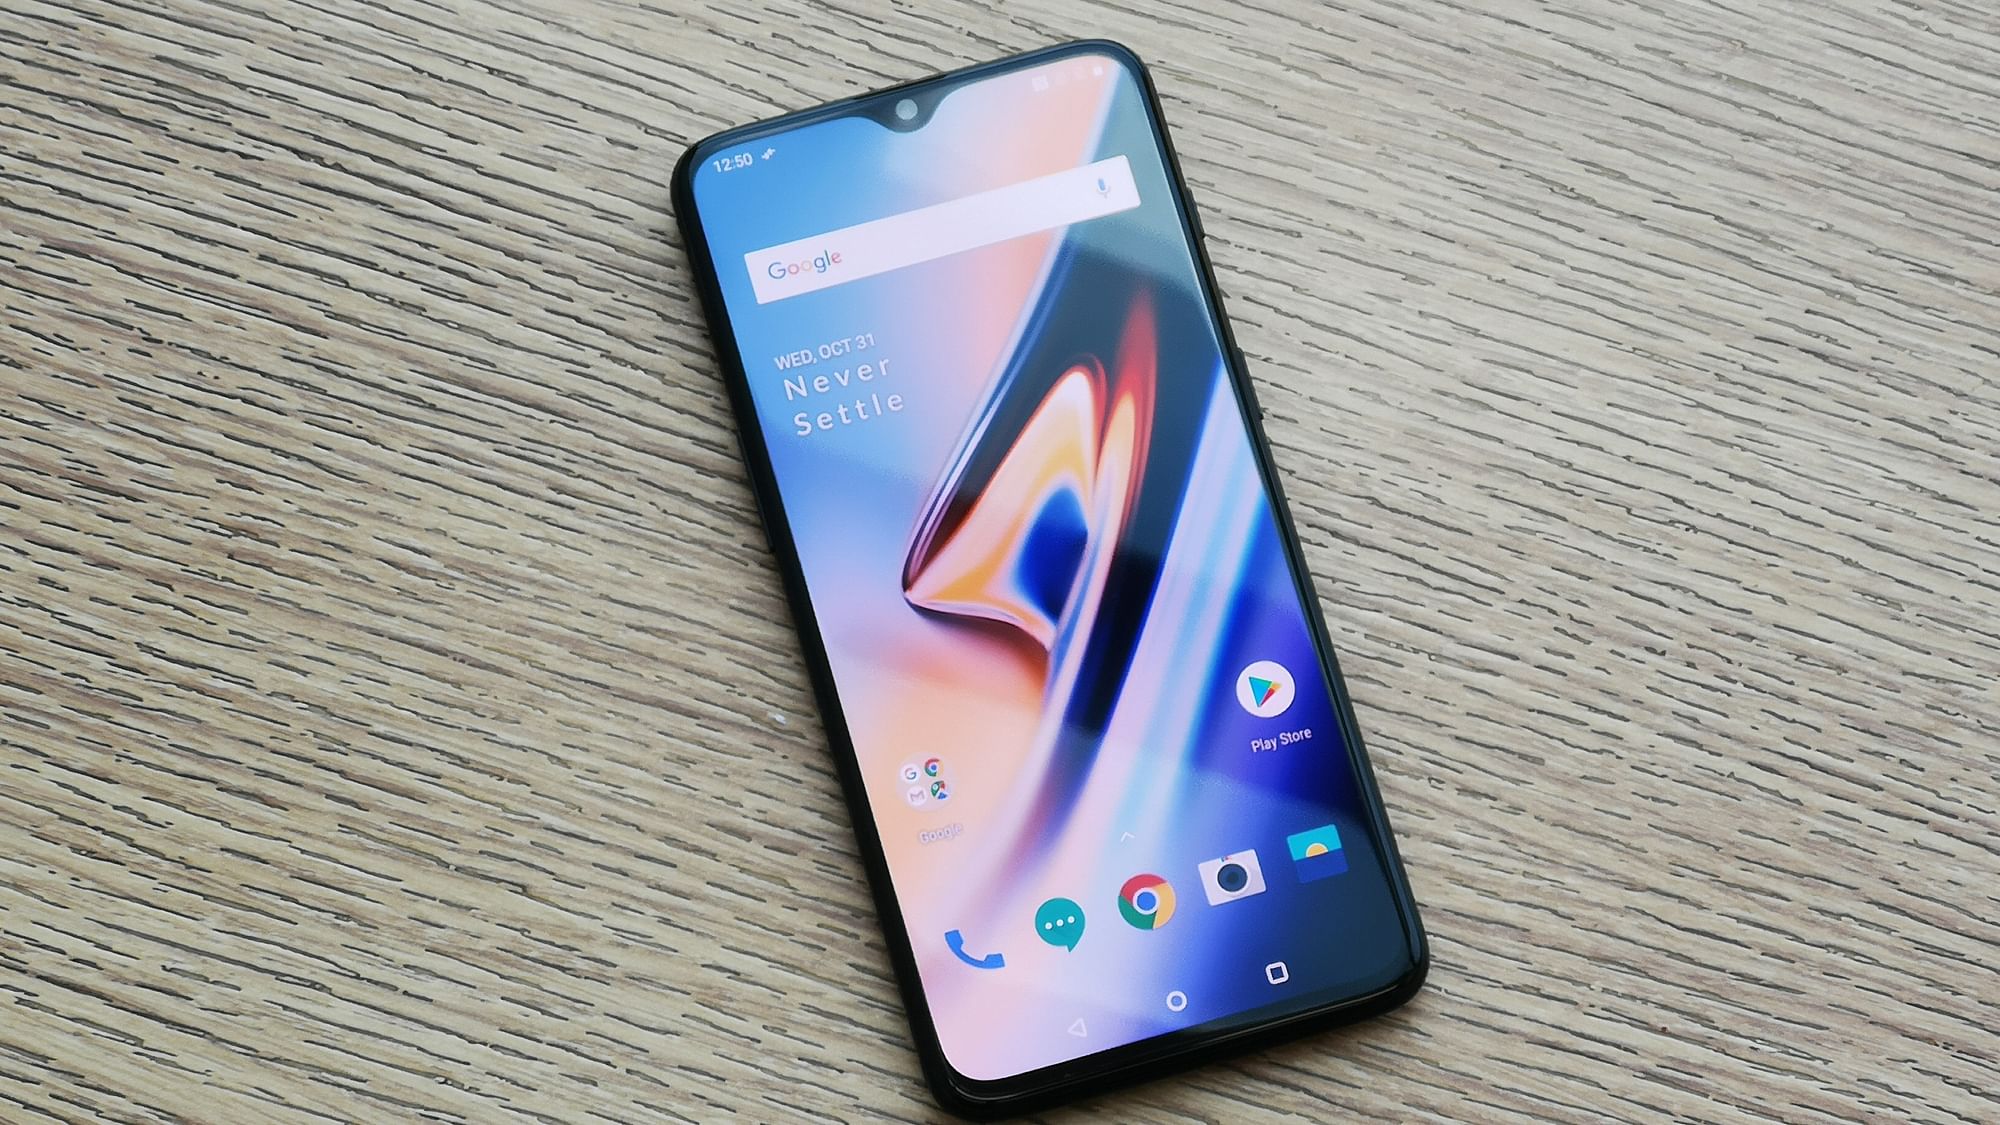 Water drop notch makes its debut on a OnePlus phone with the 6T.&nbsp;